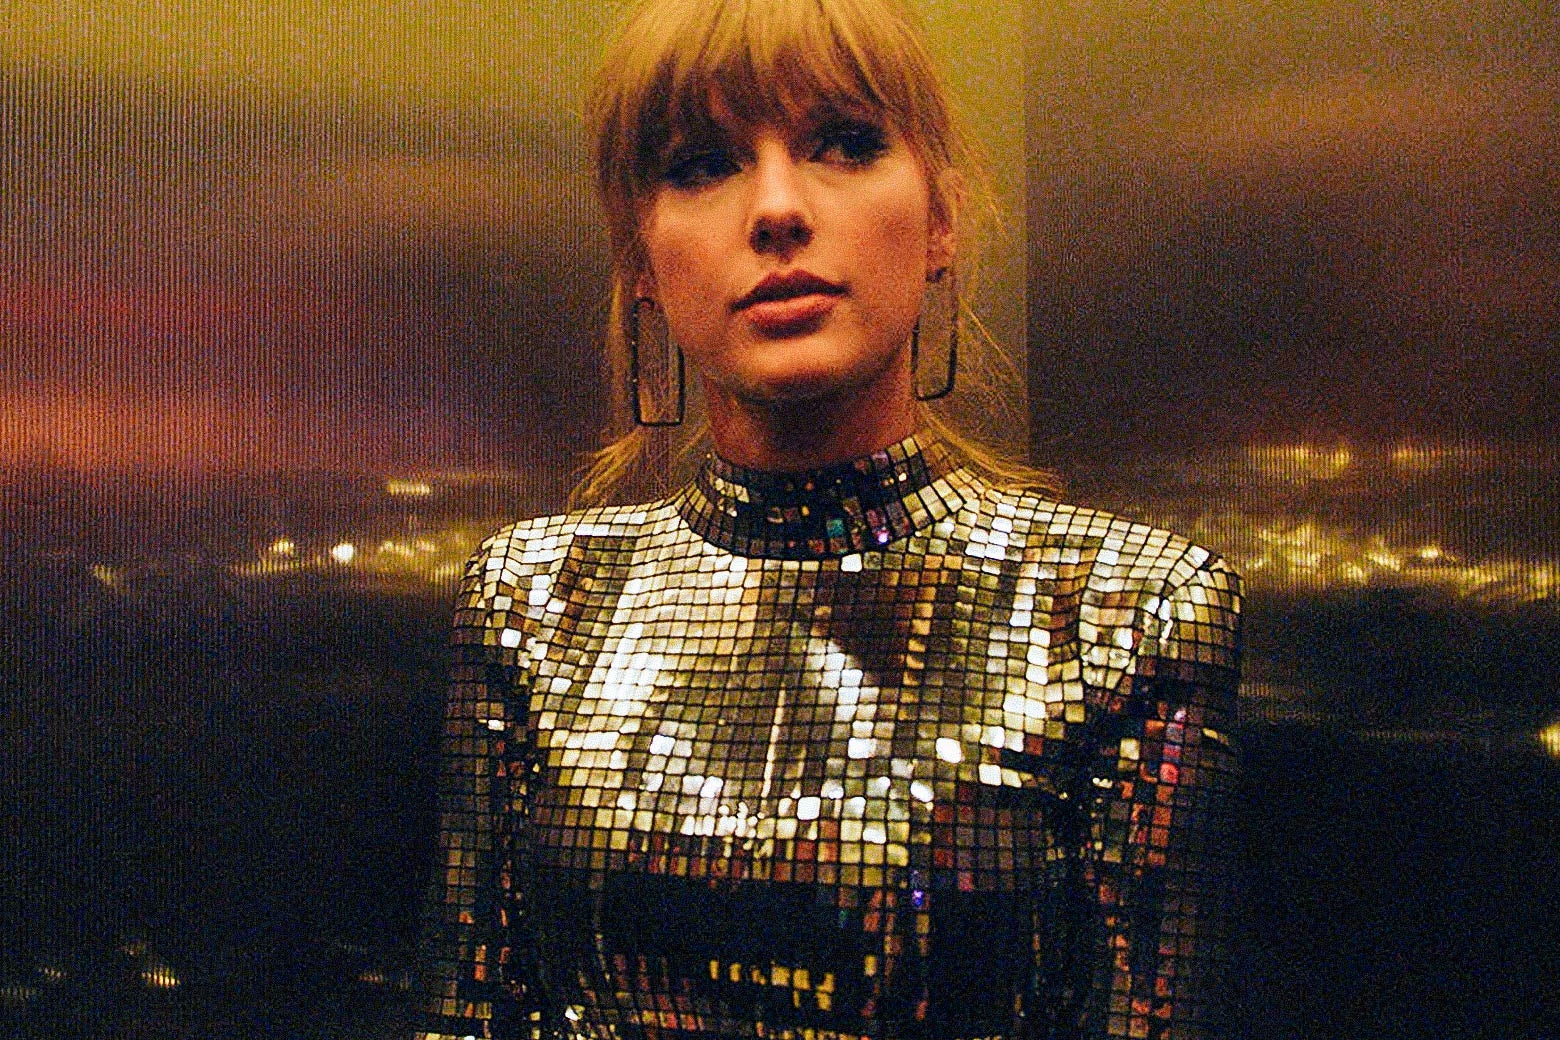 Taylor Swift in an elevator, looking like she's wearing a mirrorball for a shirt